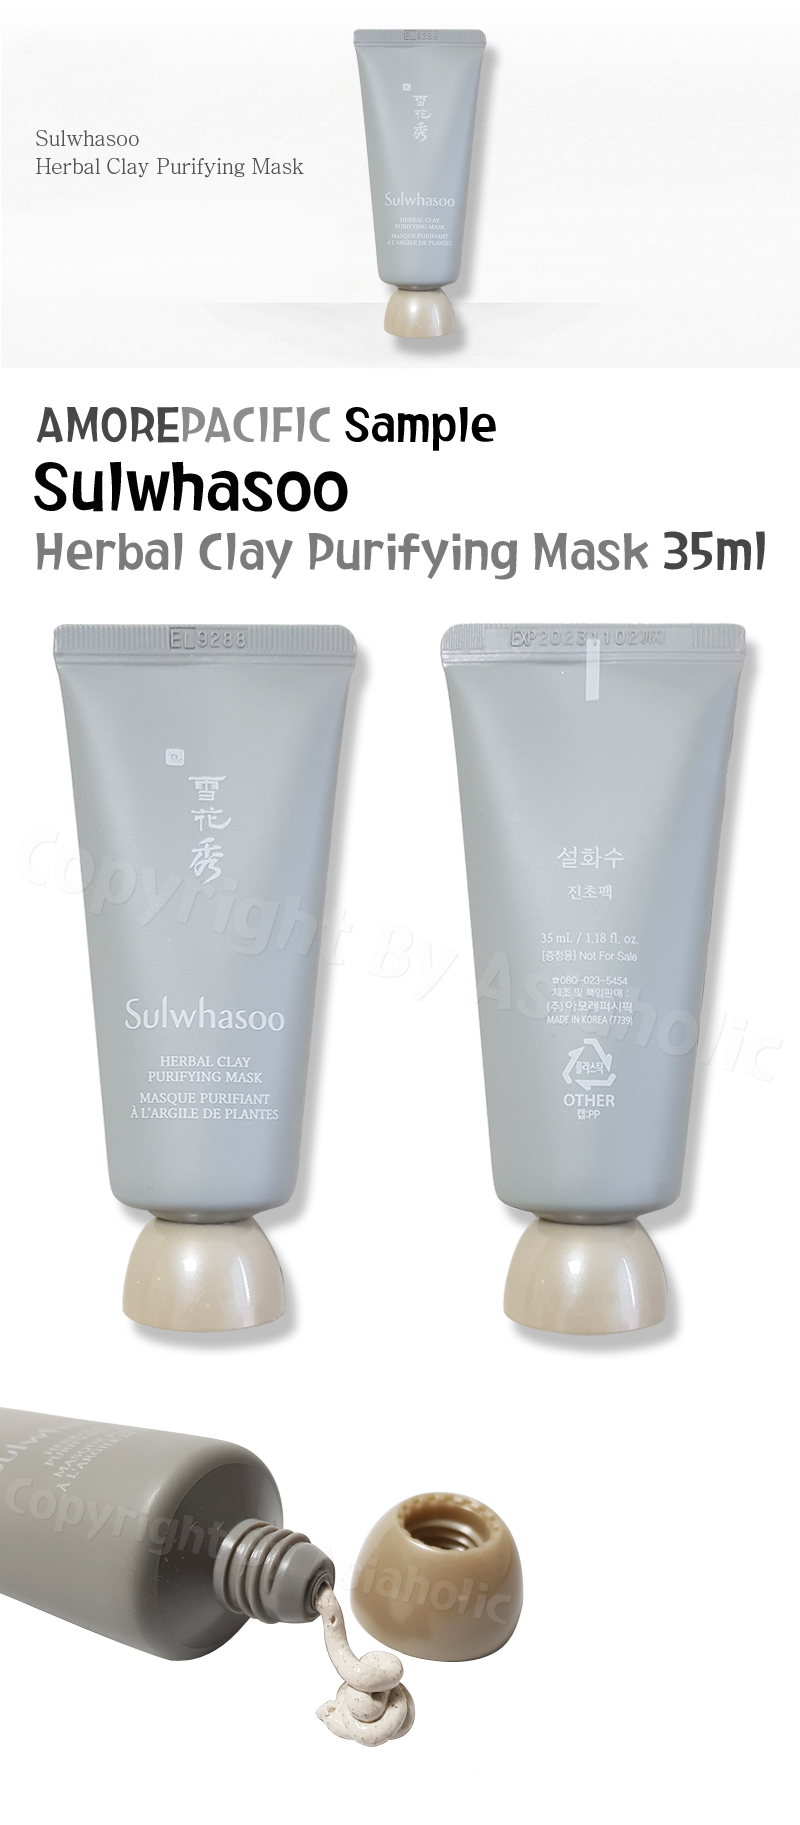 Sulwhasoo Herbal Clay Purifying Mask 35ml (1pcs ~ 10pcs) Sample Newest Version